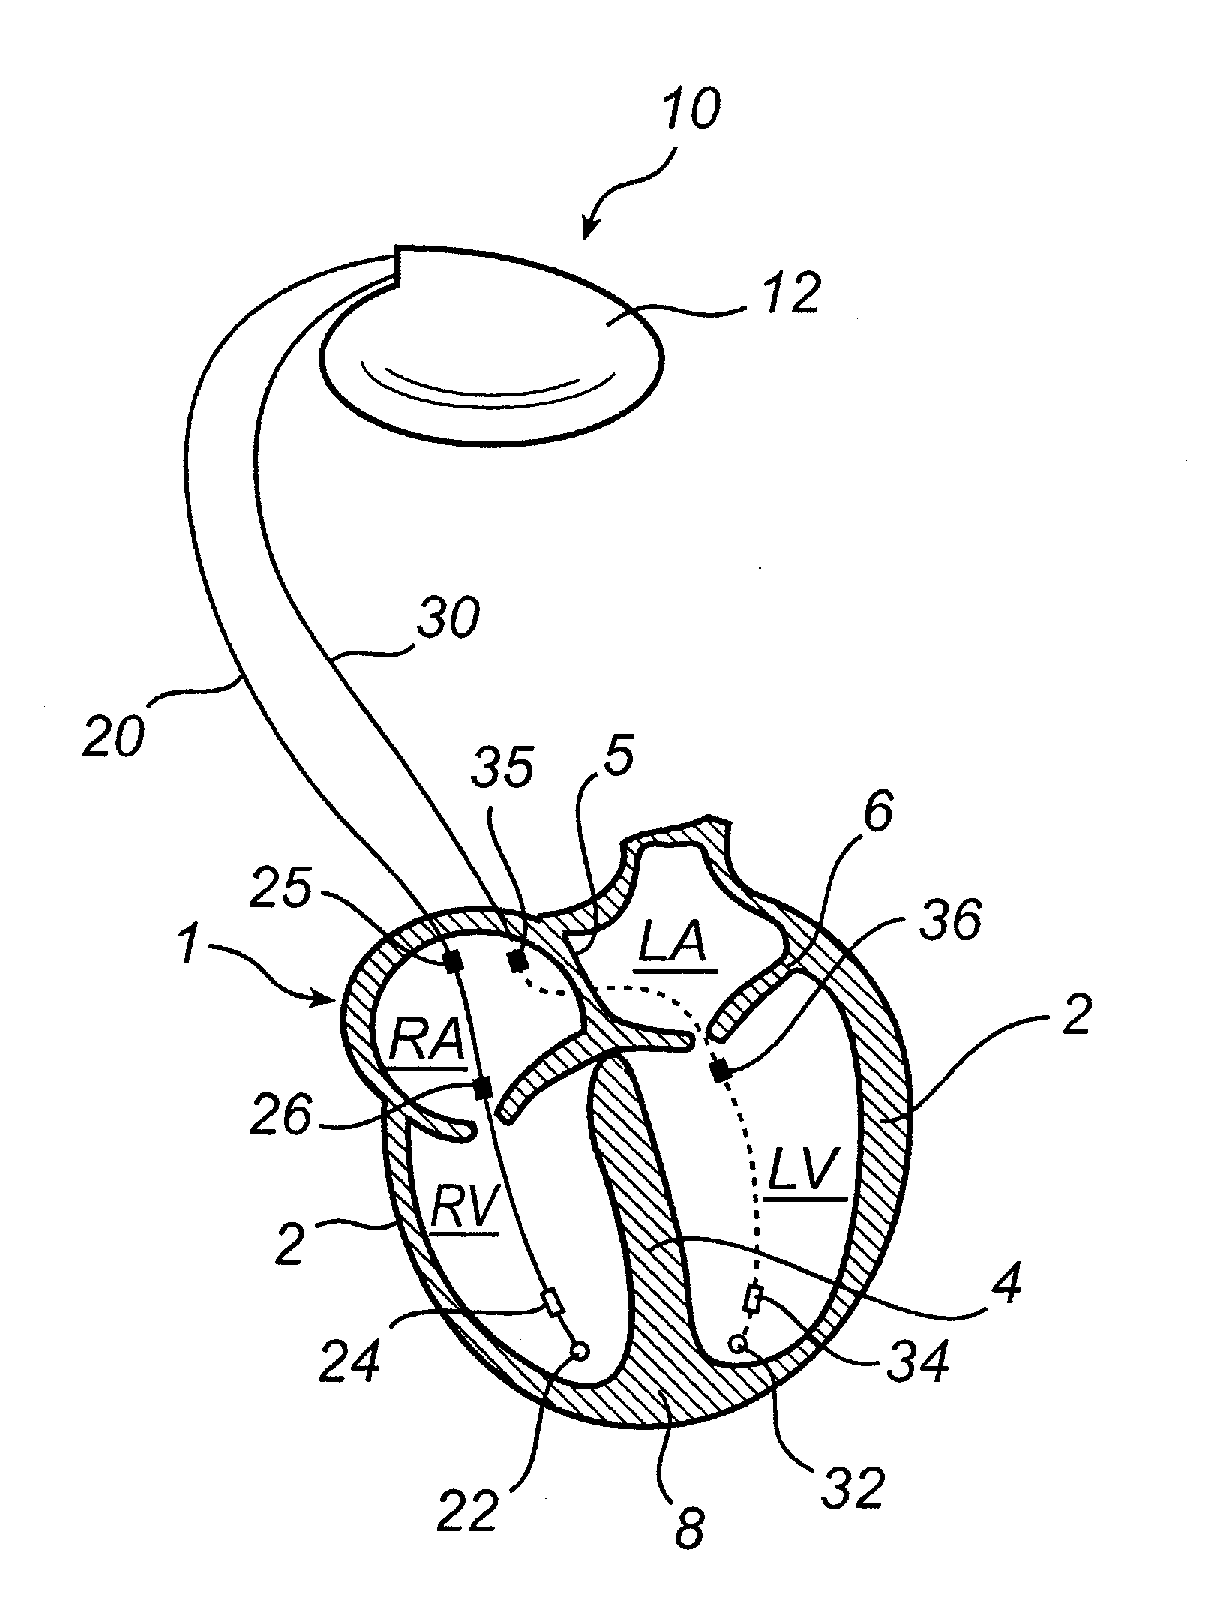 Implantable medical device and method for monitoring valve movements of a heart